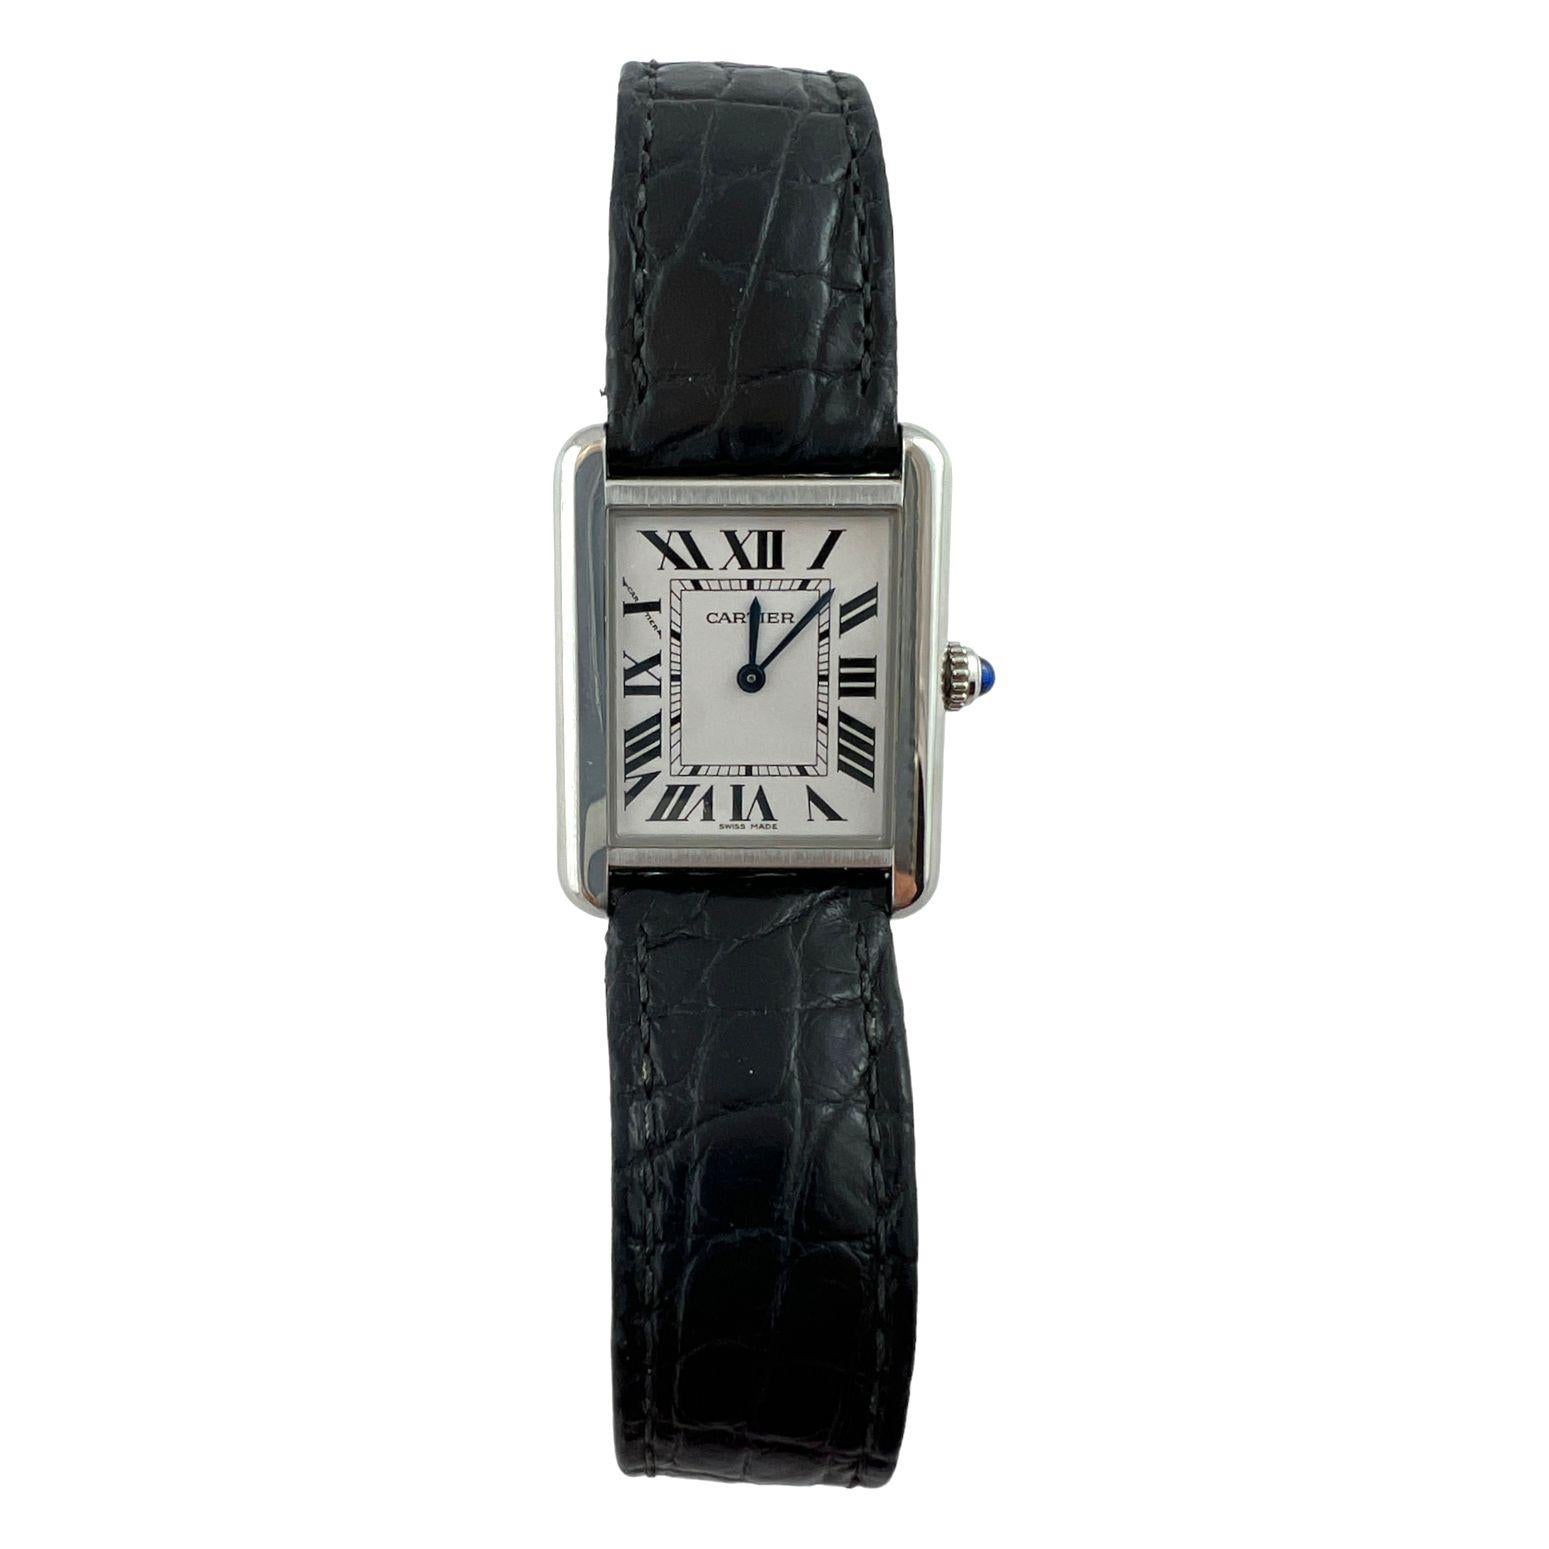 Cartier Tank Solo Ladies Watch

Model: 3170
Serial: 0514153WX

This classic Cartier ladies watch is set in stainless steel

Case is 24mm x 31mm

White Dial with black roman numerals and blue hands

Quartz movement

Blue cabochon sapphire